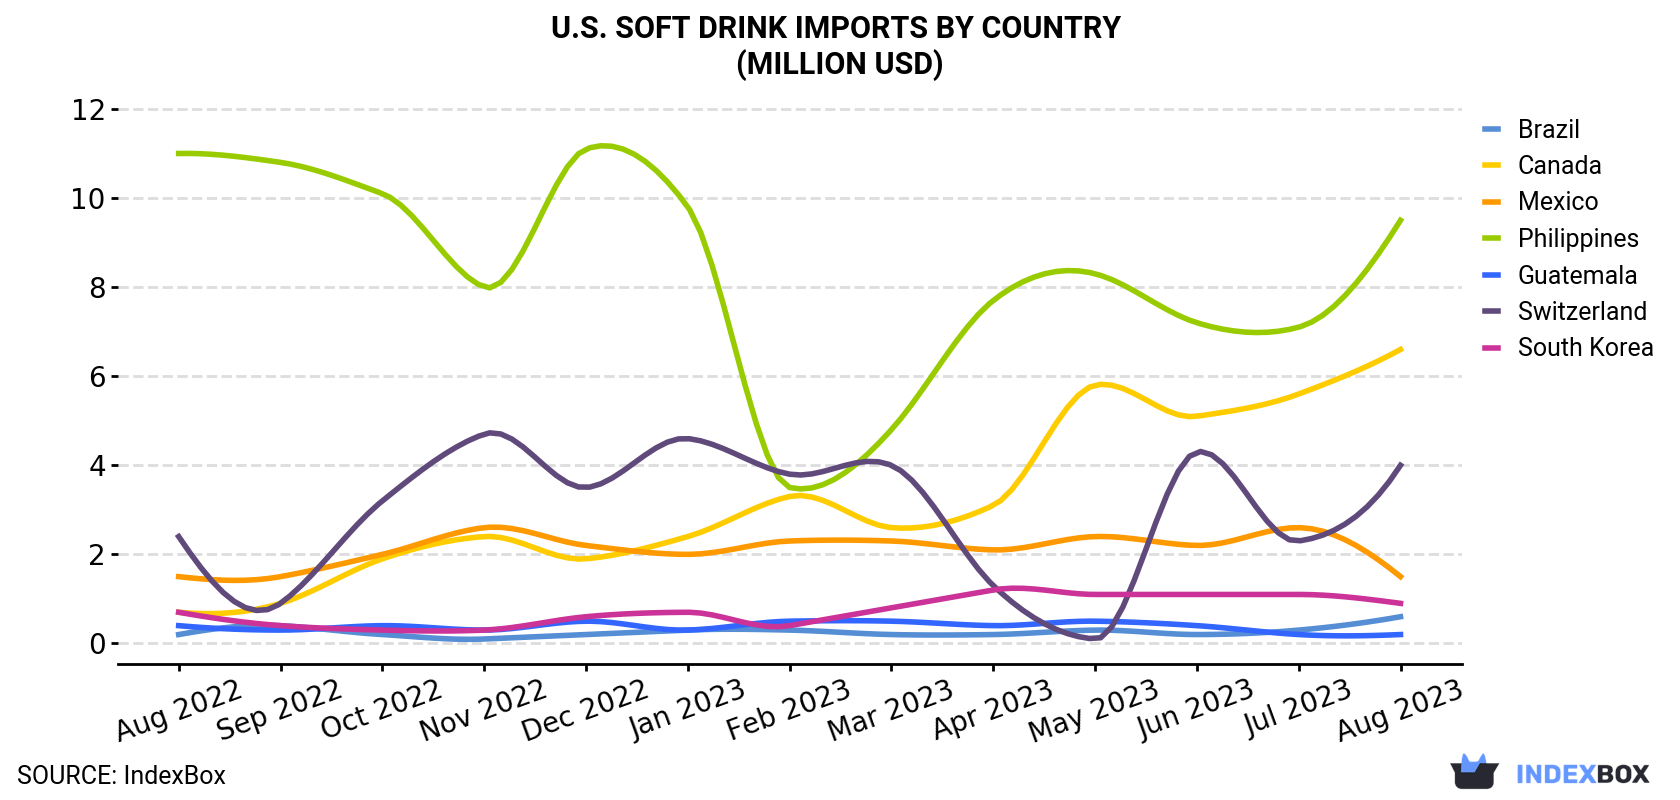 U.S. Soft Drink Imports By Country (Million USD)